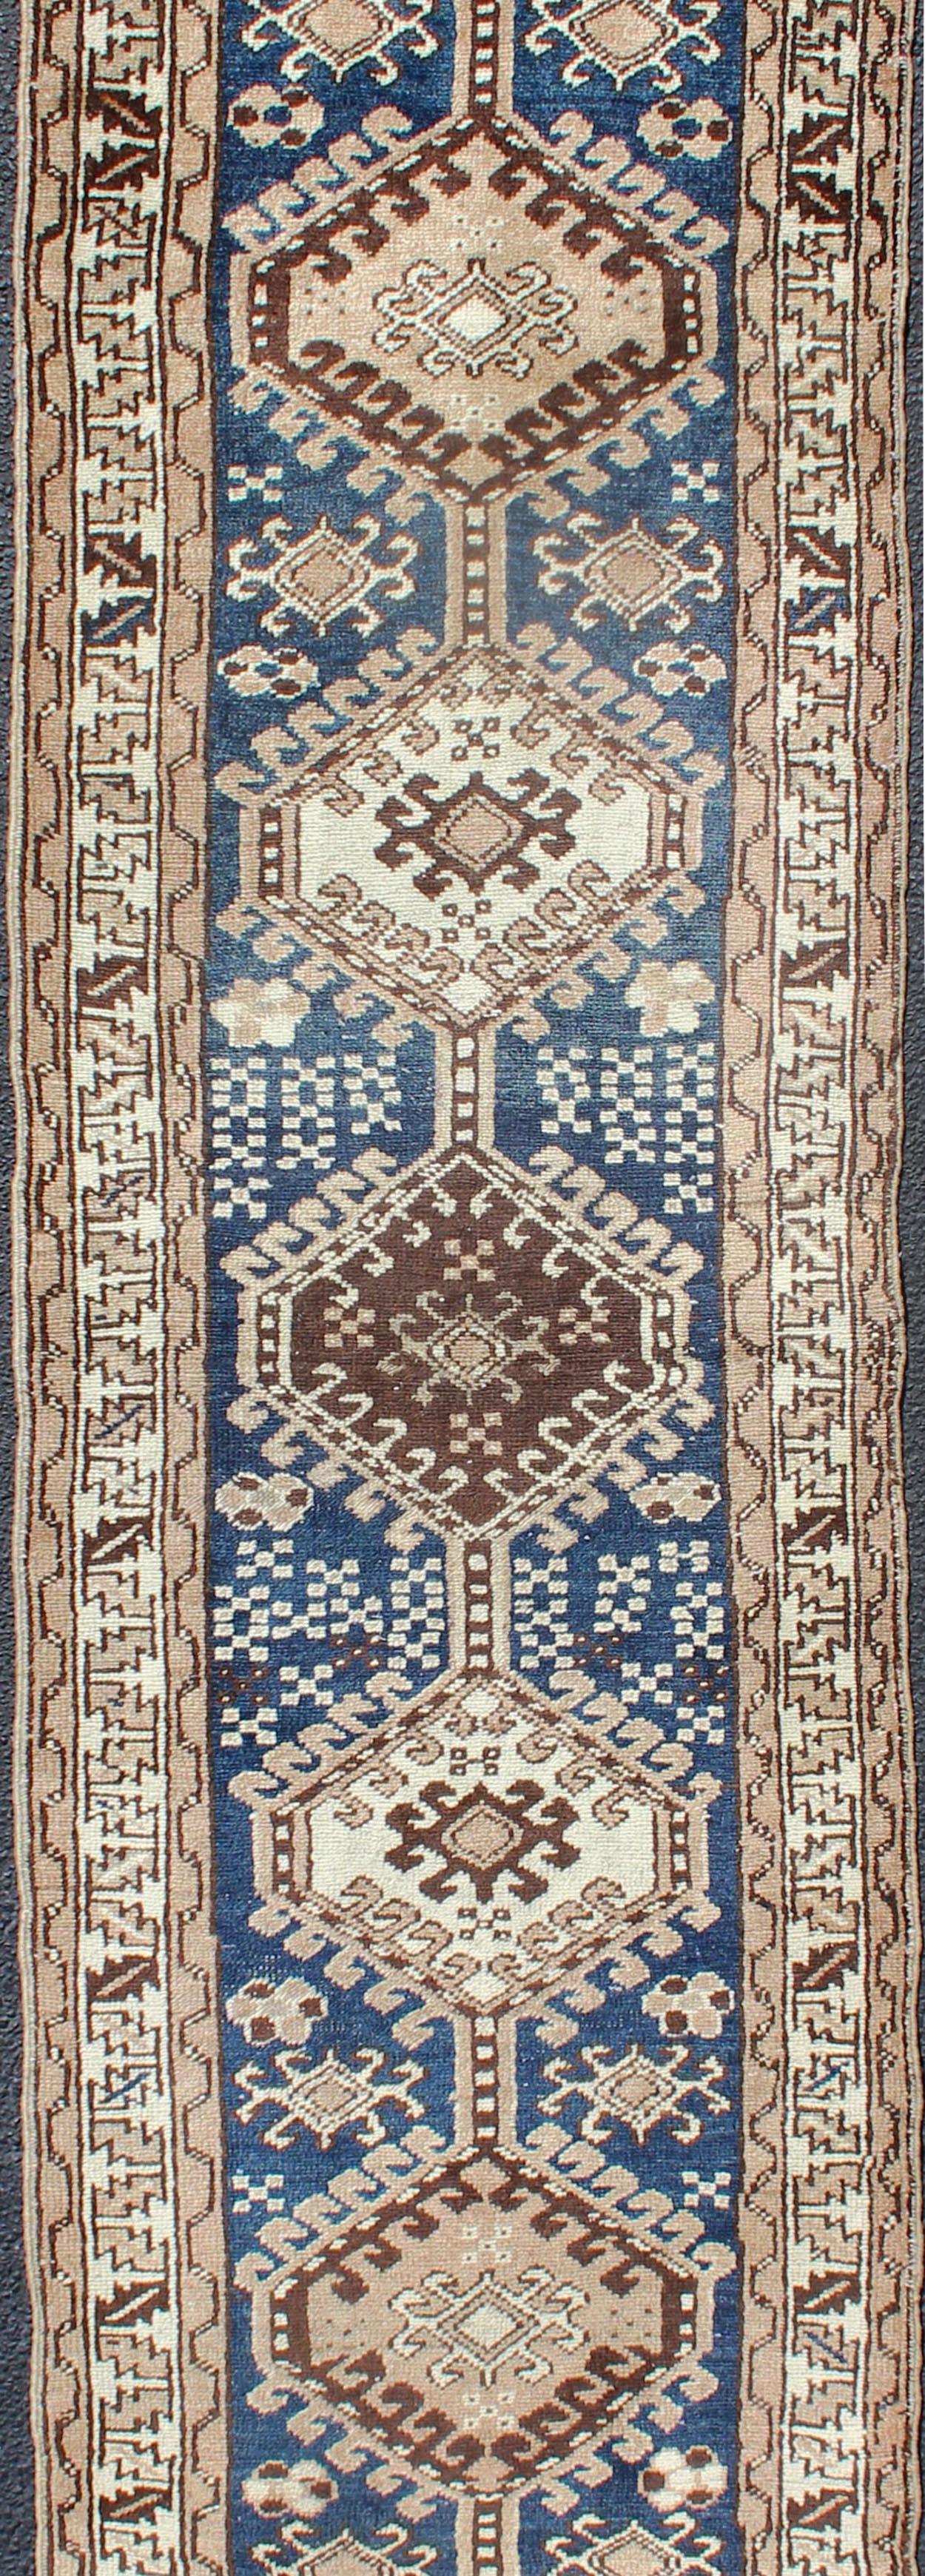 Persian Antique Blue Tribal Karajeh Runner With Navy Blue, Brown and Earth Tones For Sale